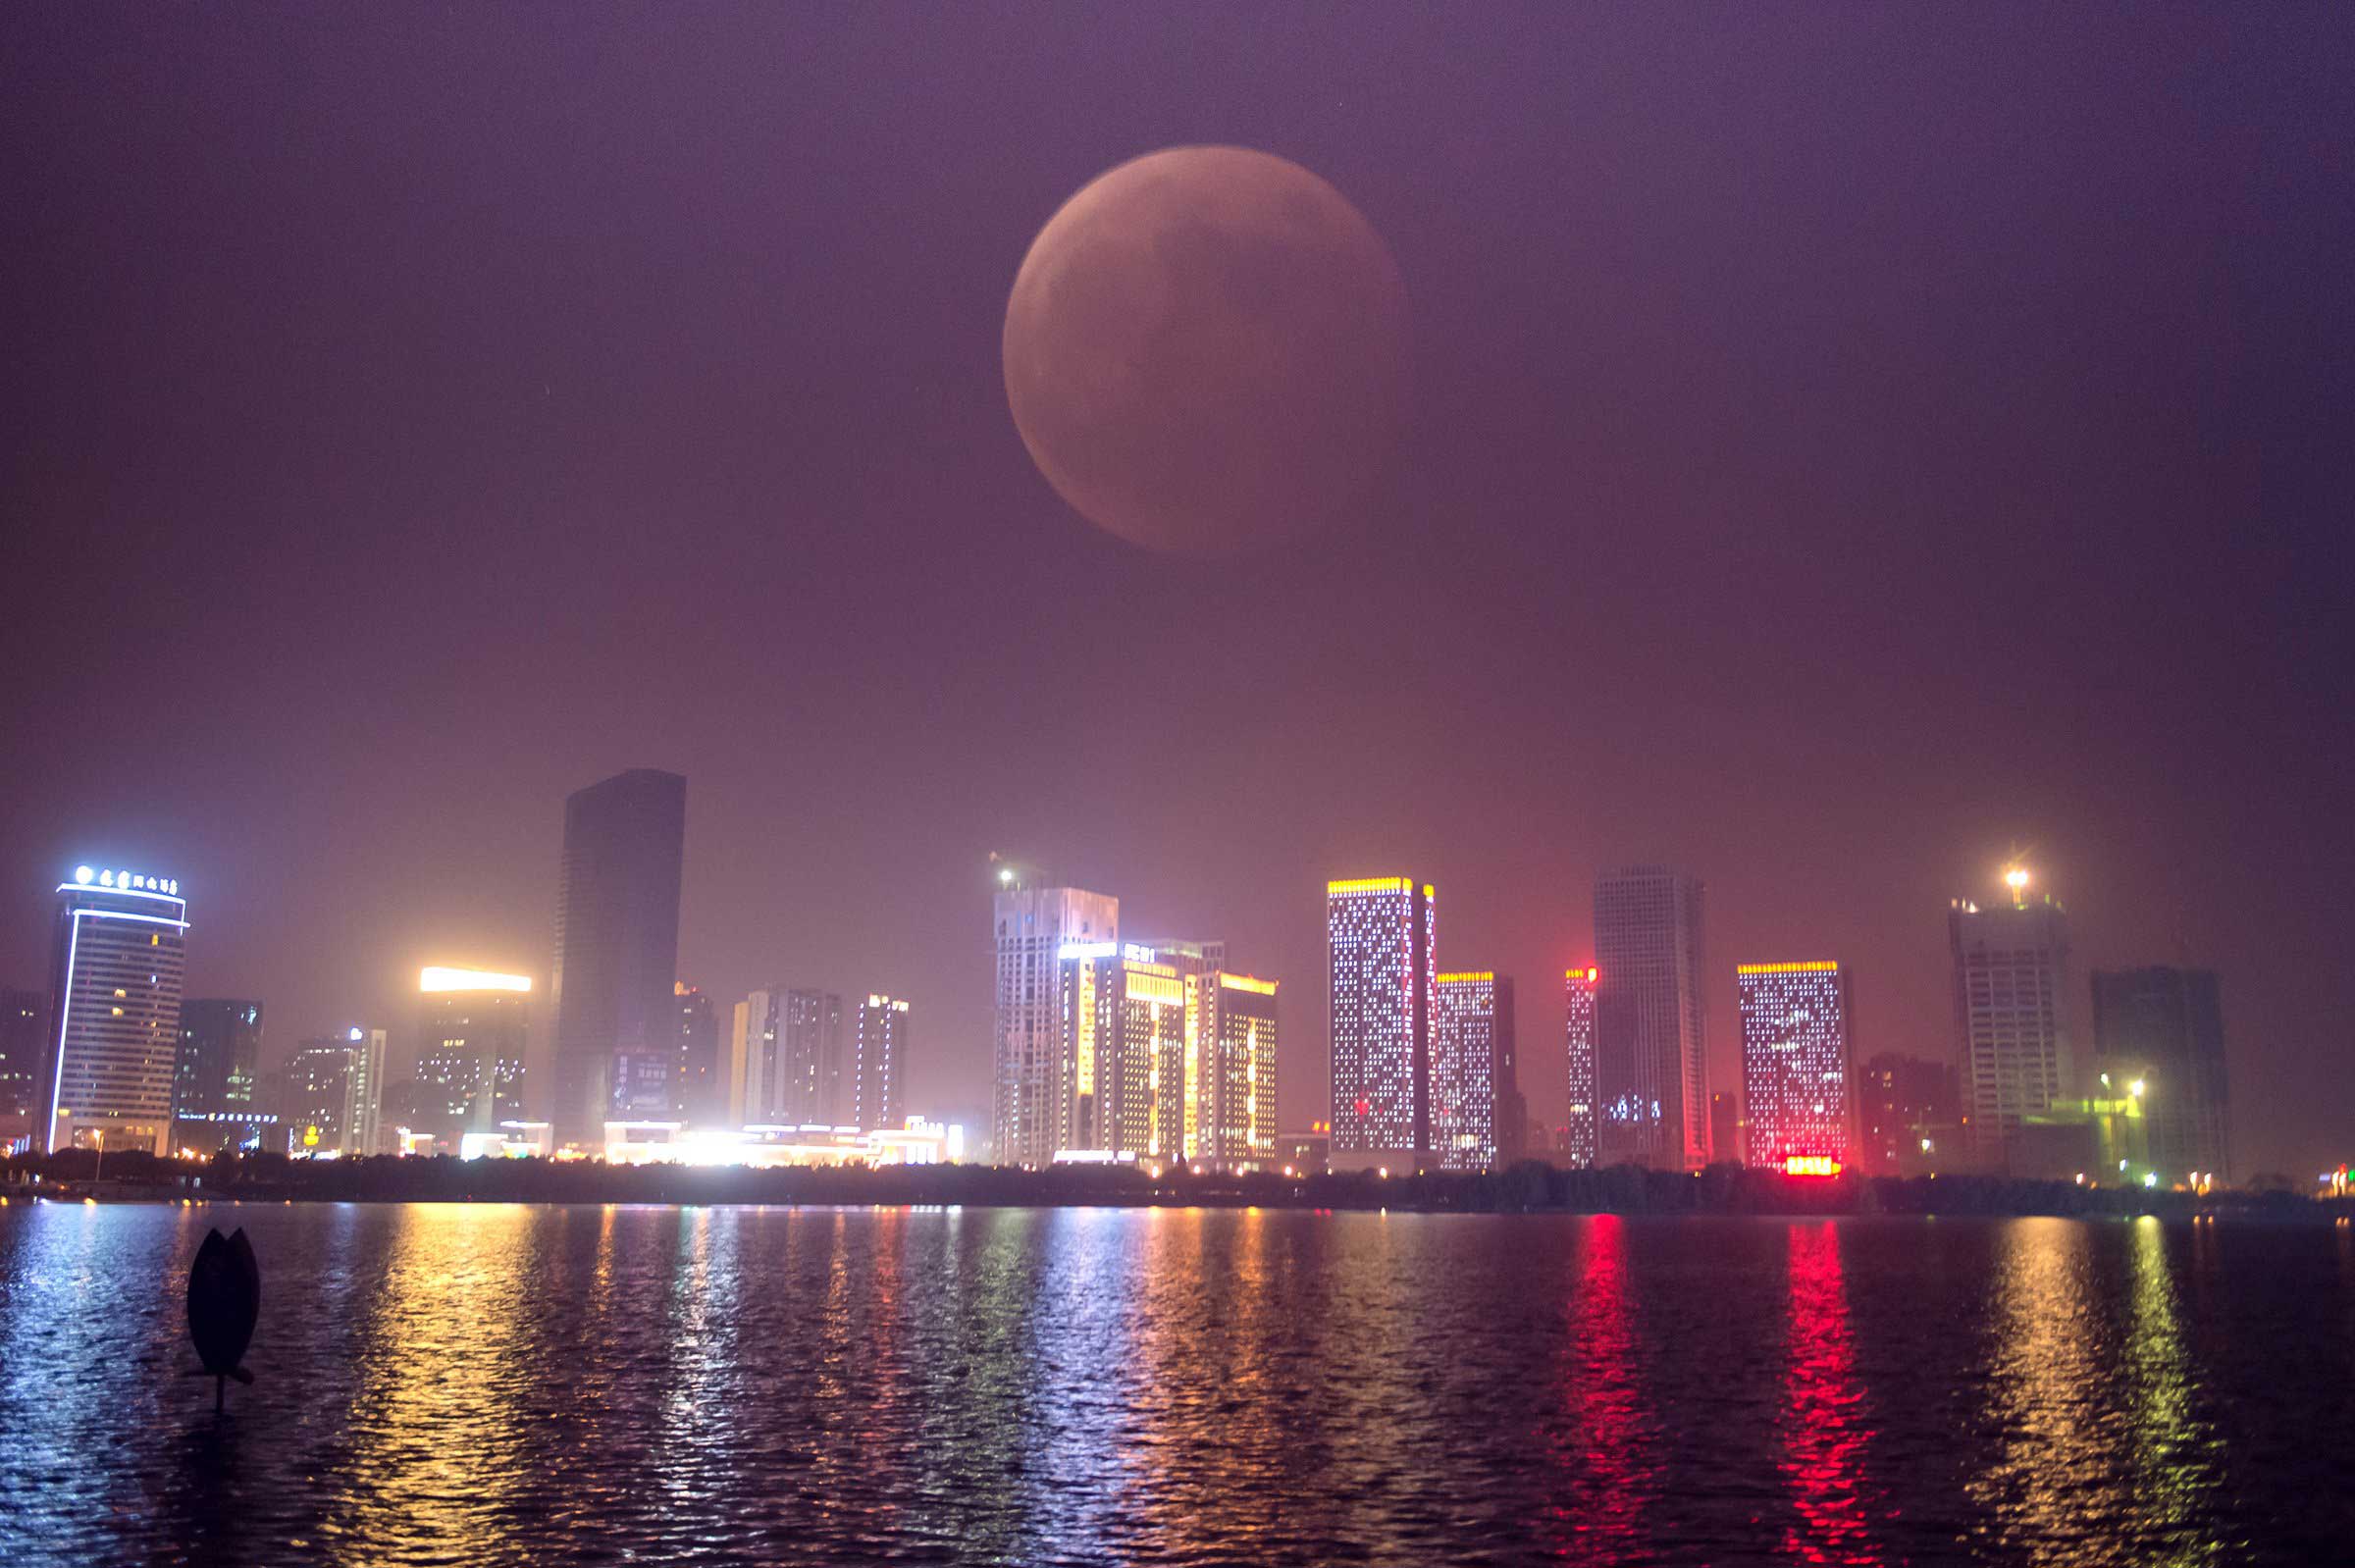 Through multiple exposures, the blood moon is shown in Hefei, China on Oct. 8, 2014. (Guo Chen—Xinhua/Sipa)